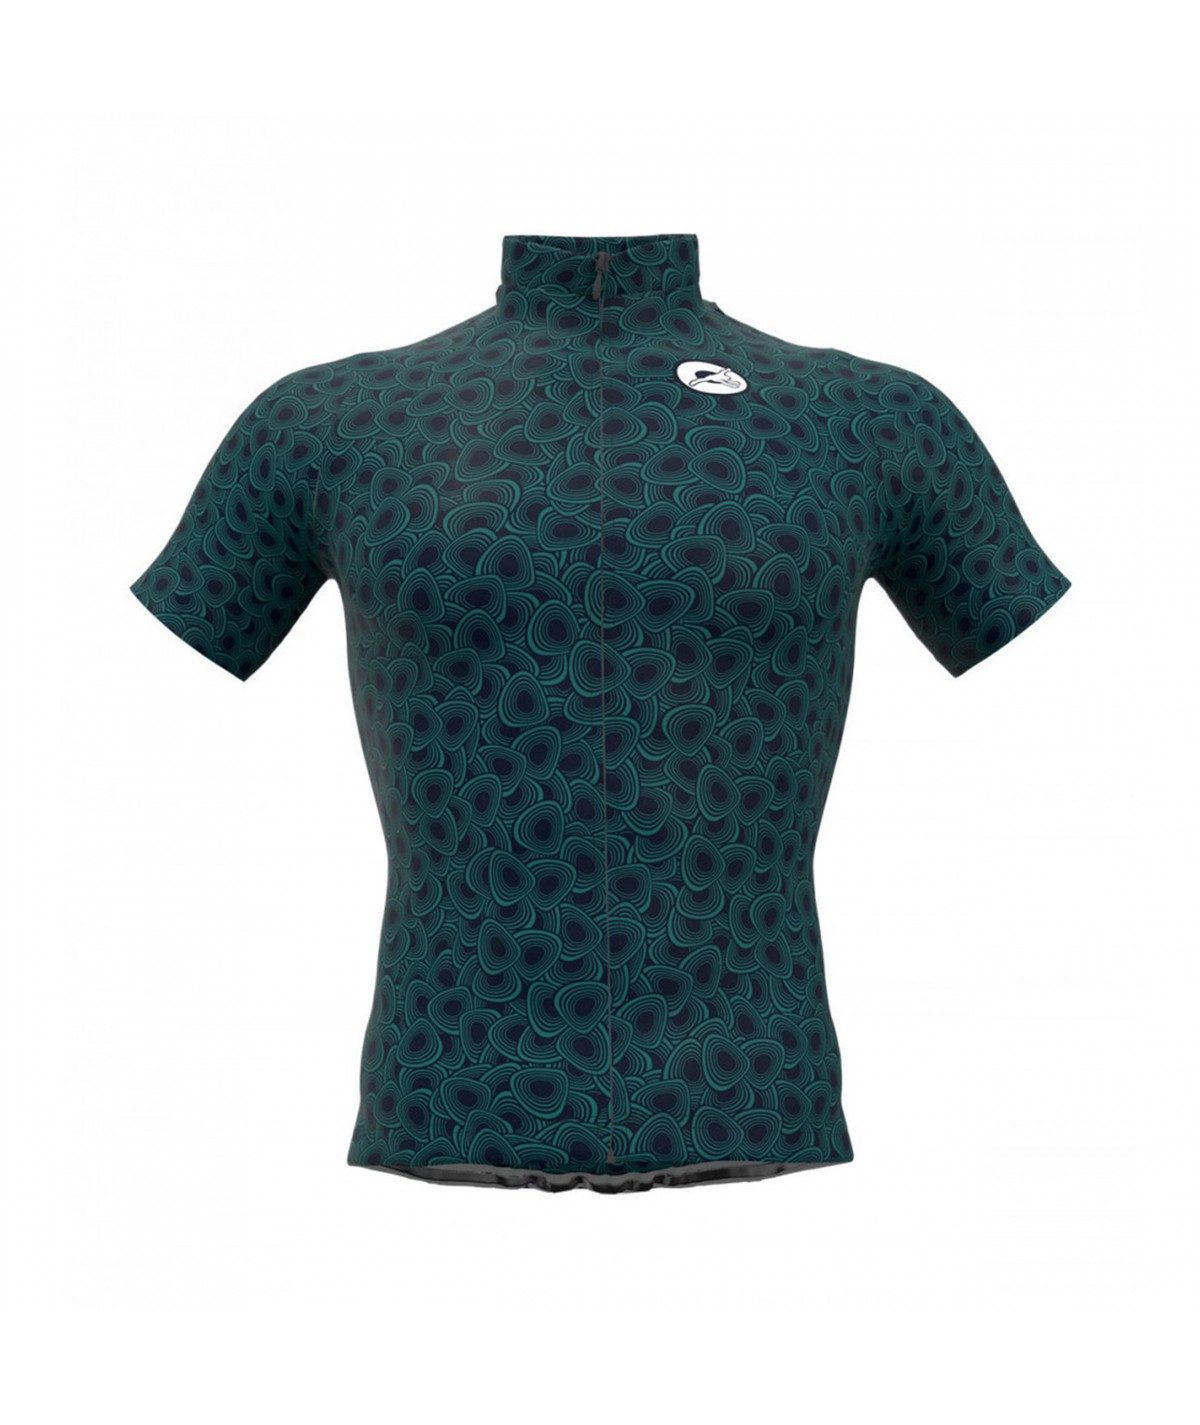 VOYAGER cycling jersey